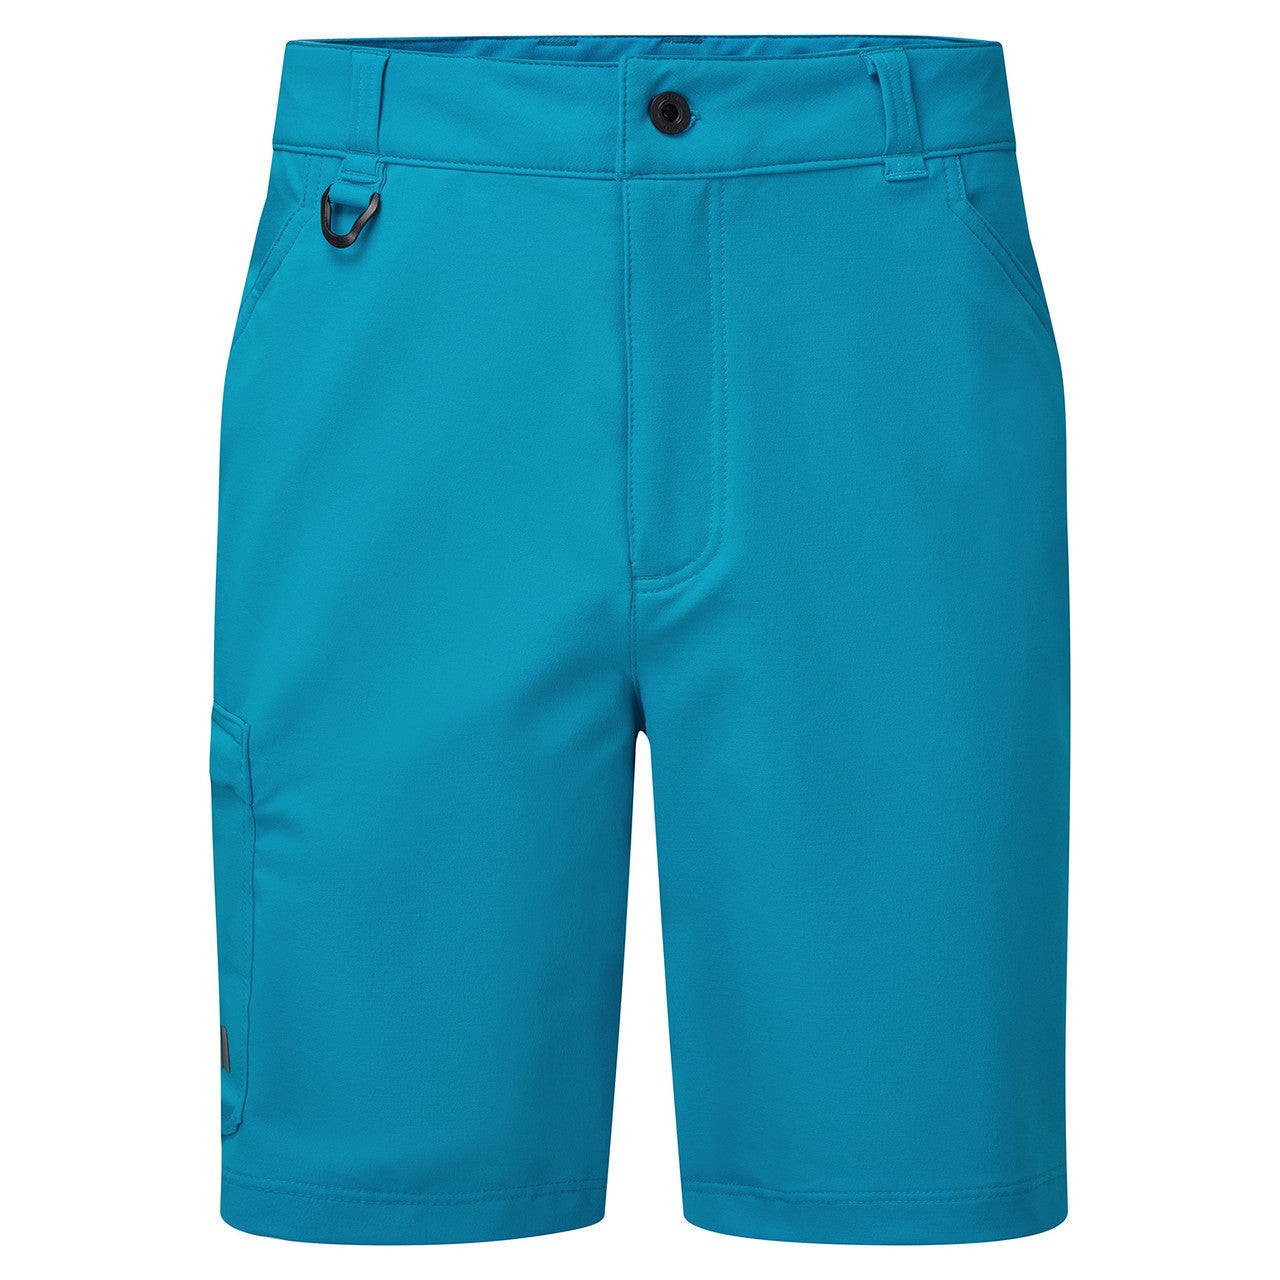 GILL Men's Pro Expedition Shorts